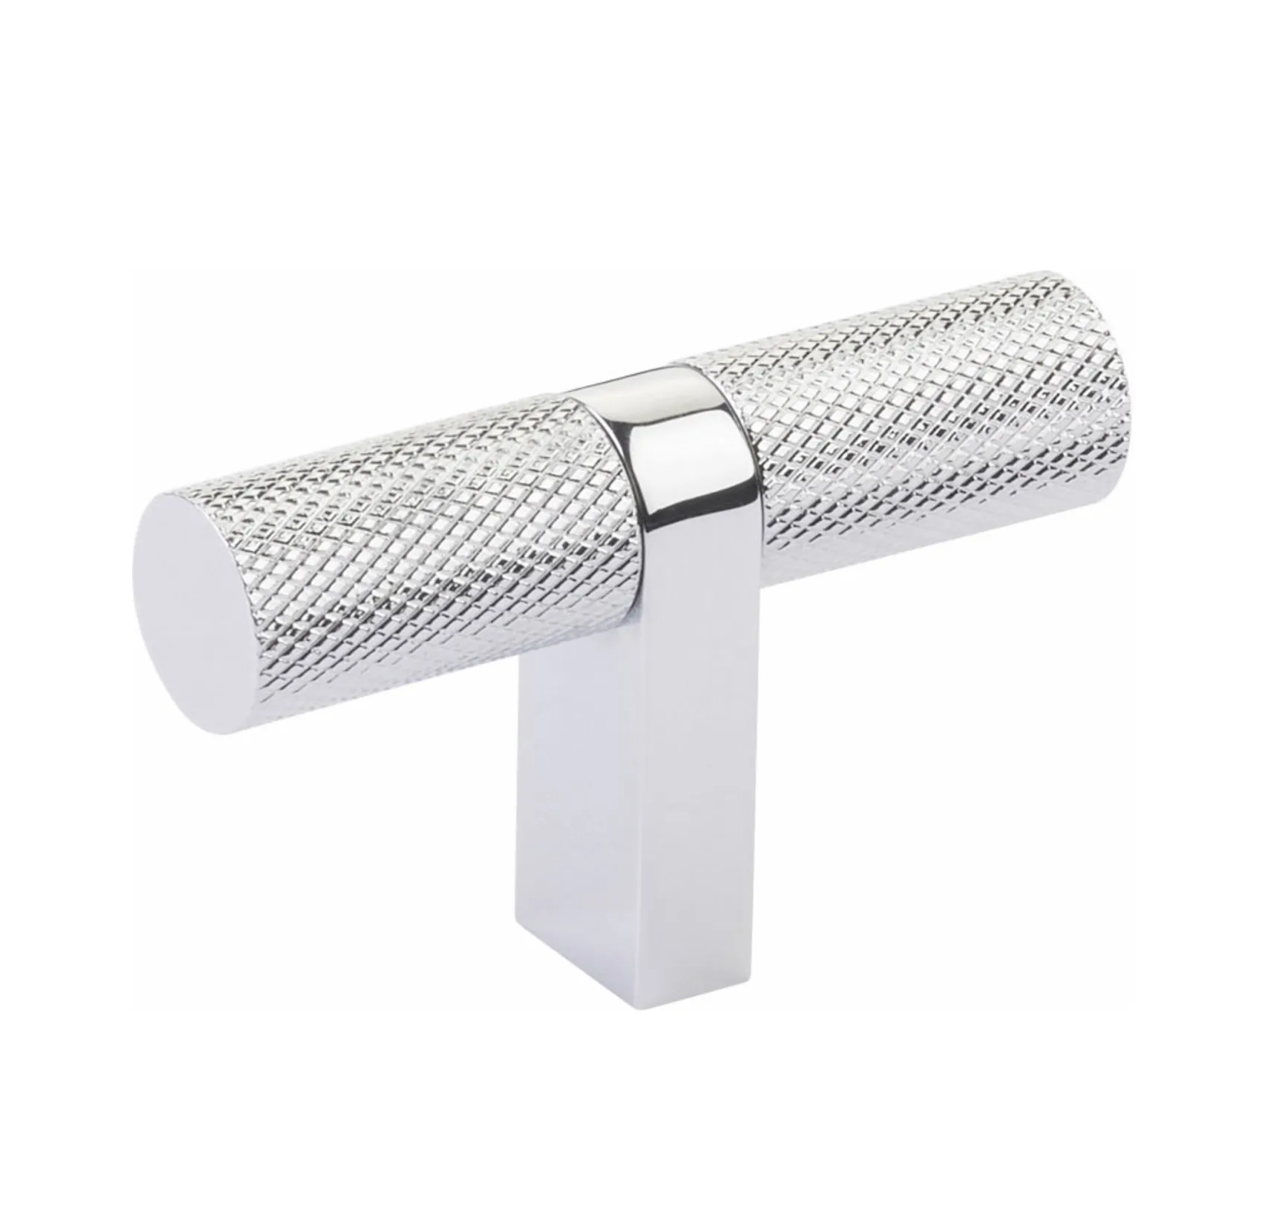 Knurled "Converse" Polished Chrome Cabinet Knobs and Drawer Pulls